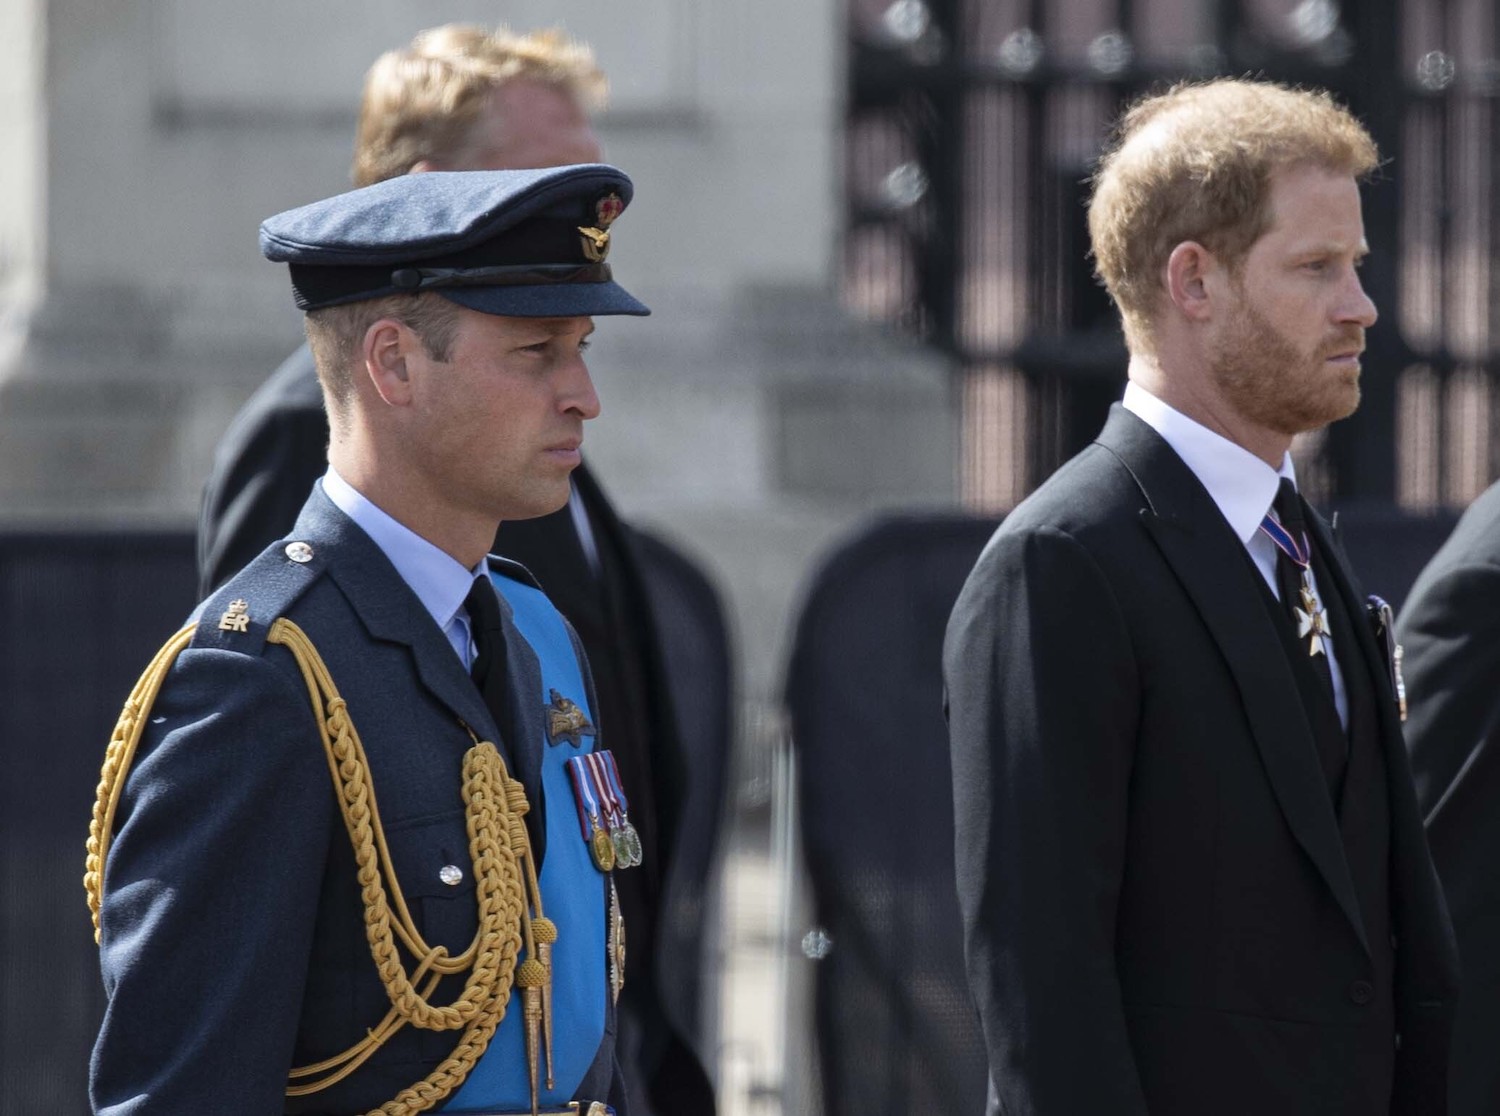 Prince William and Prince Harry walk behind Queen Elizabeth's coffin on their way to Westminster Hall